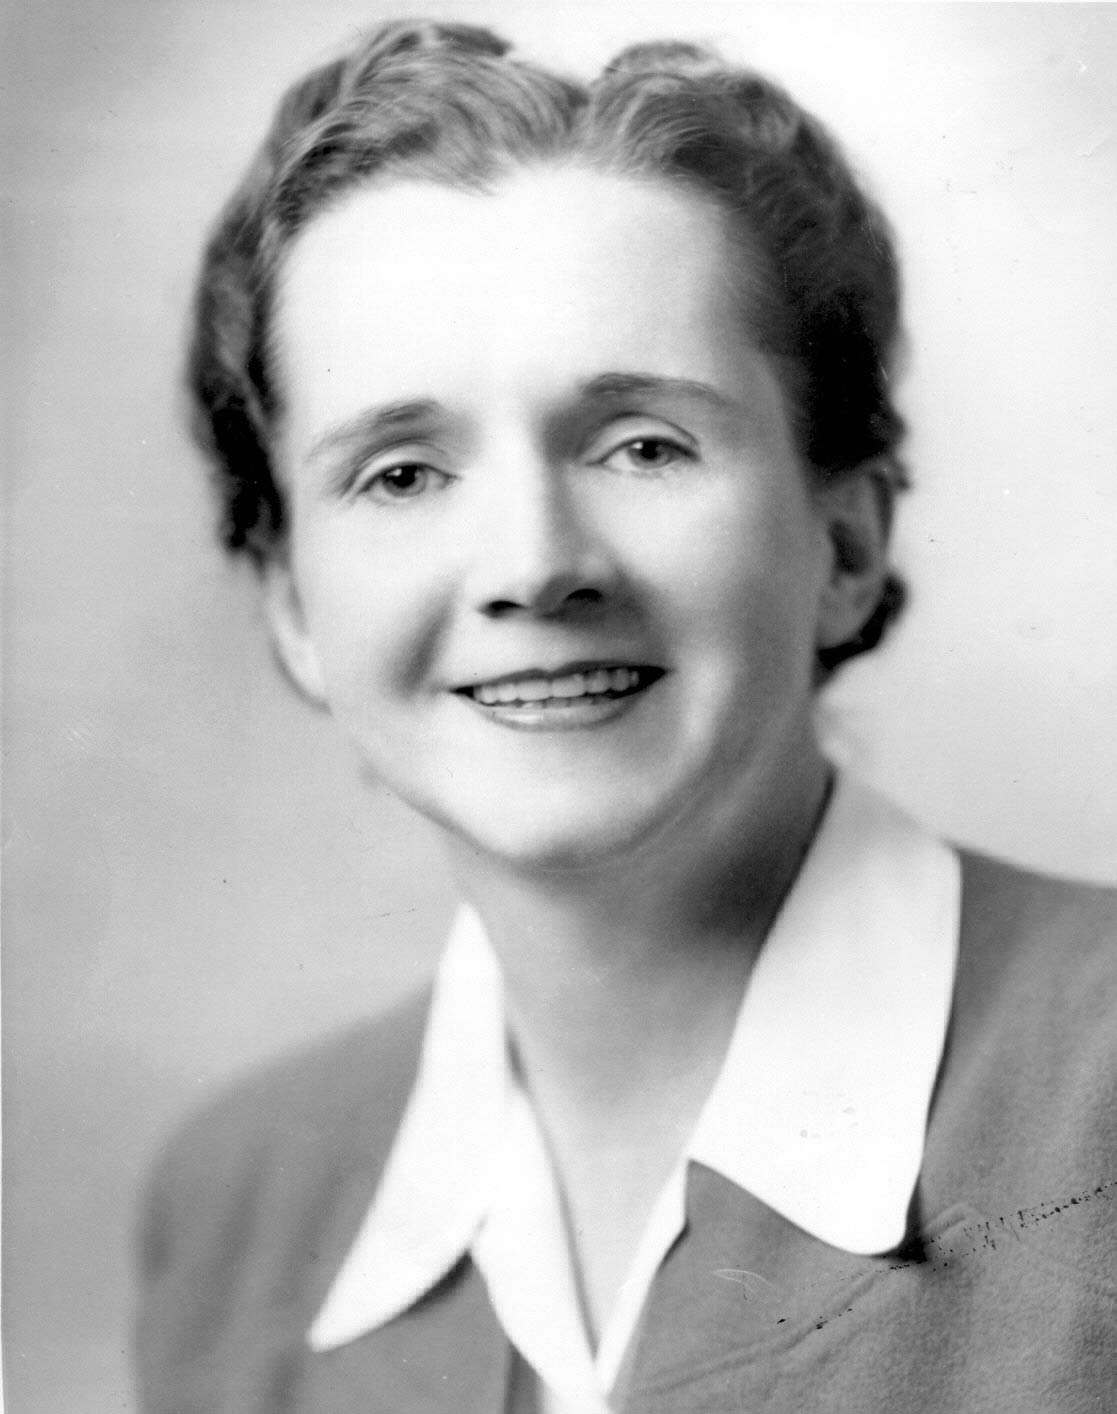 A young Rachel Carson smiles in a black-and-white photo.